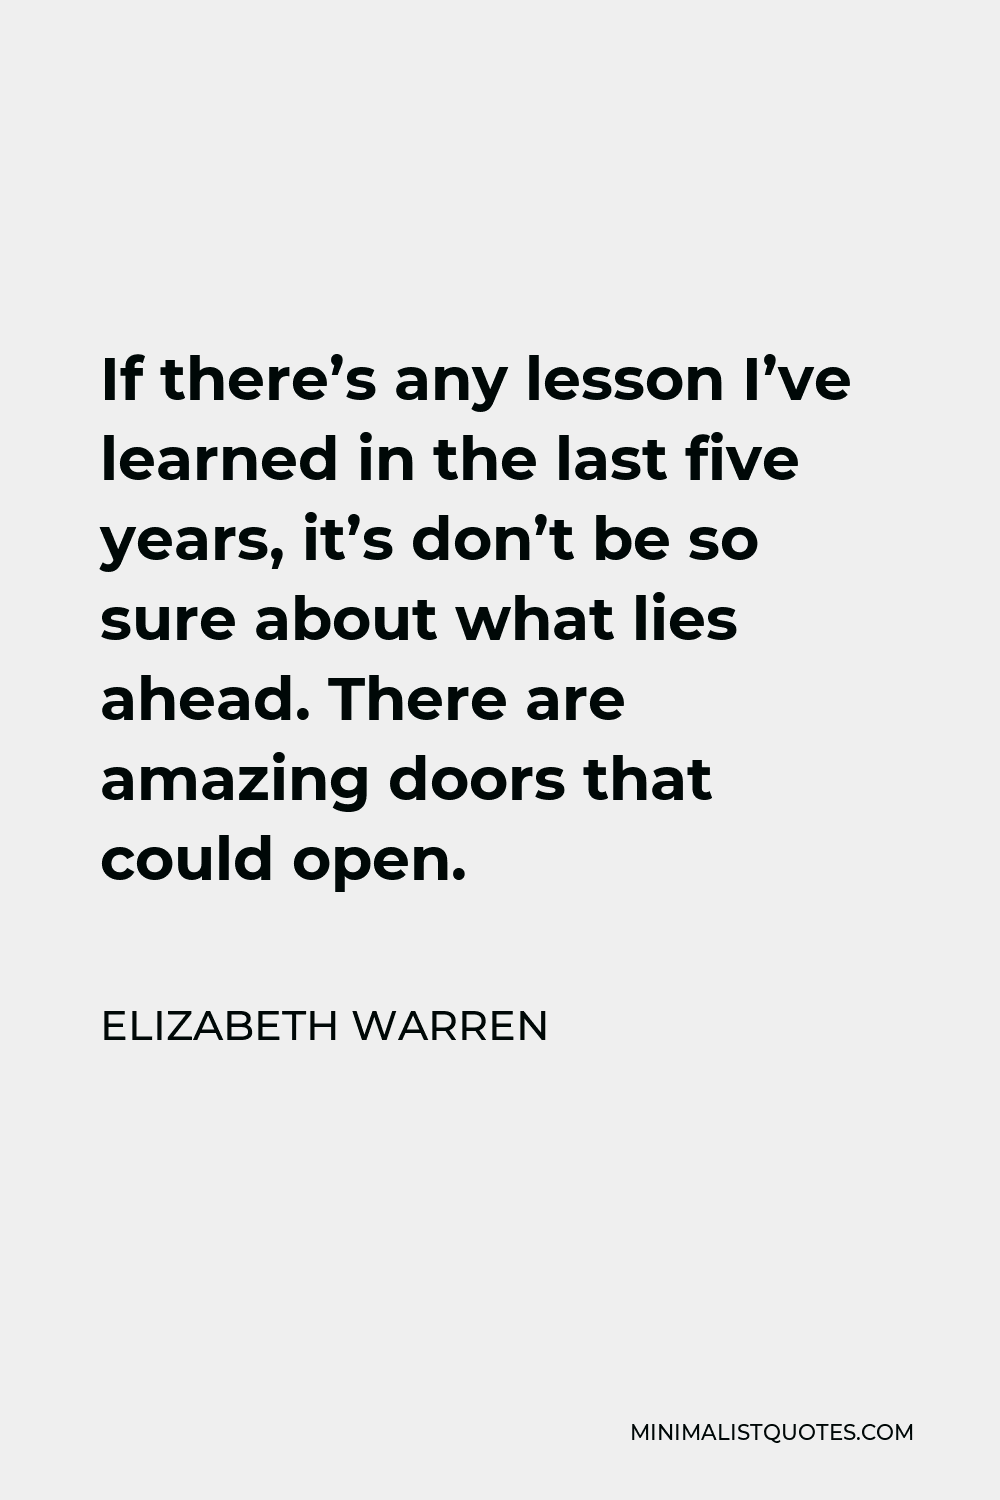 Elizabeth Warren Quote - If there’s any lesson I’ve learned in the last five years, it’s don’t be so sure about what lies ahead. There are amazing doors that could open.